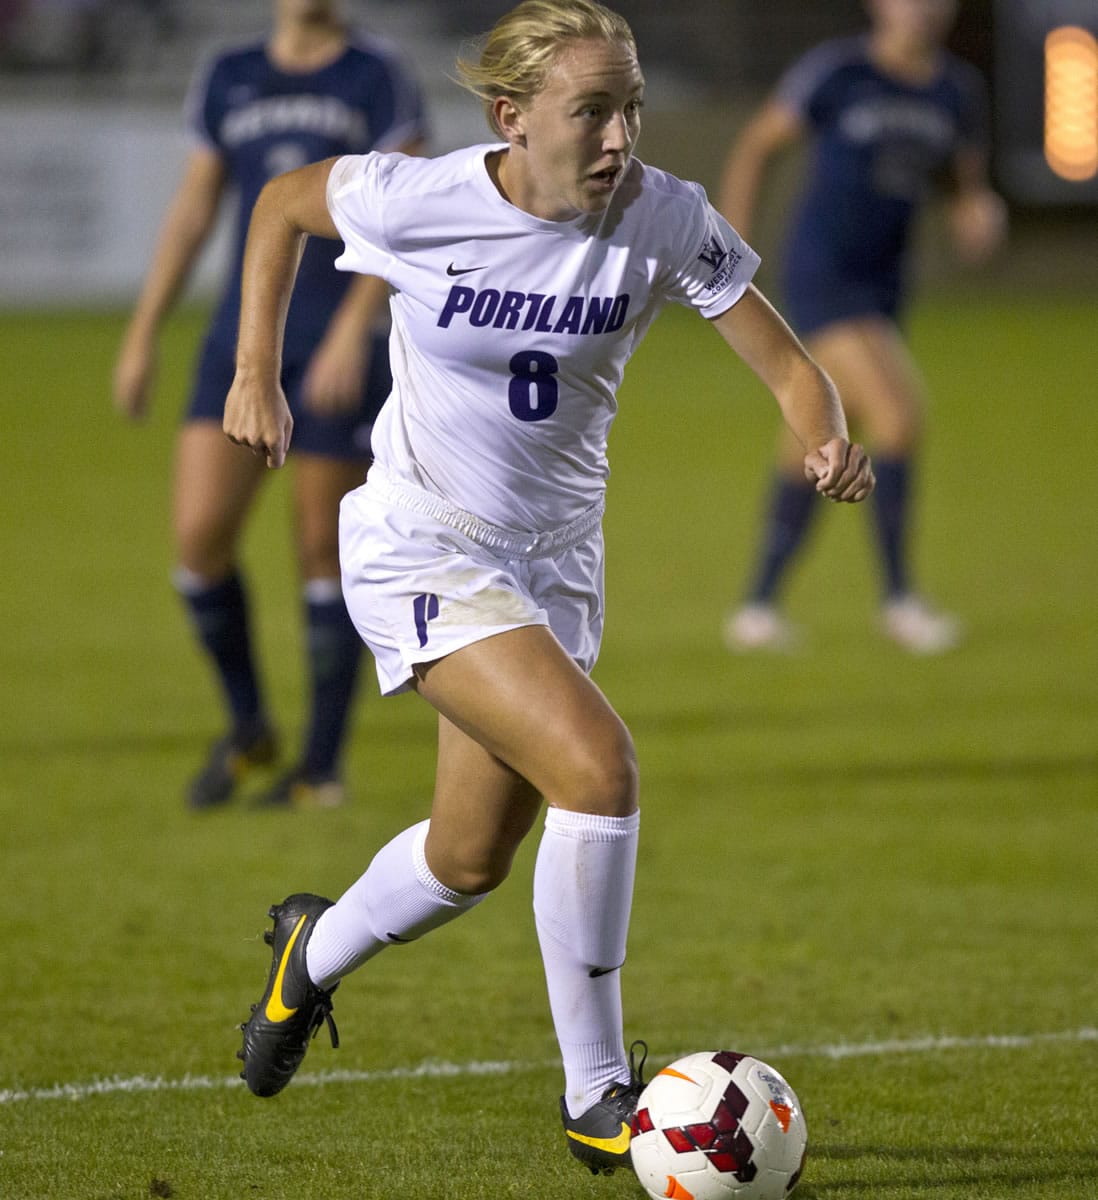 University of Portland
Ellie Boon of Washougal has helped the Portland Pilots reach the second round of the NCAA tournament.